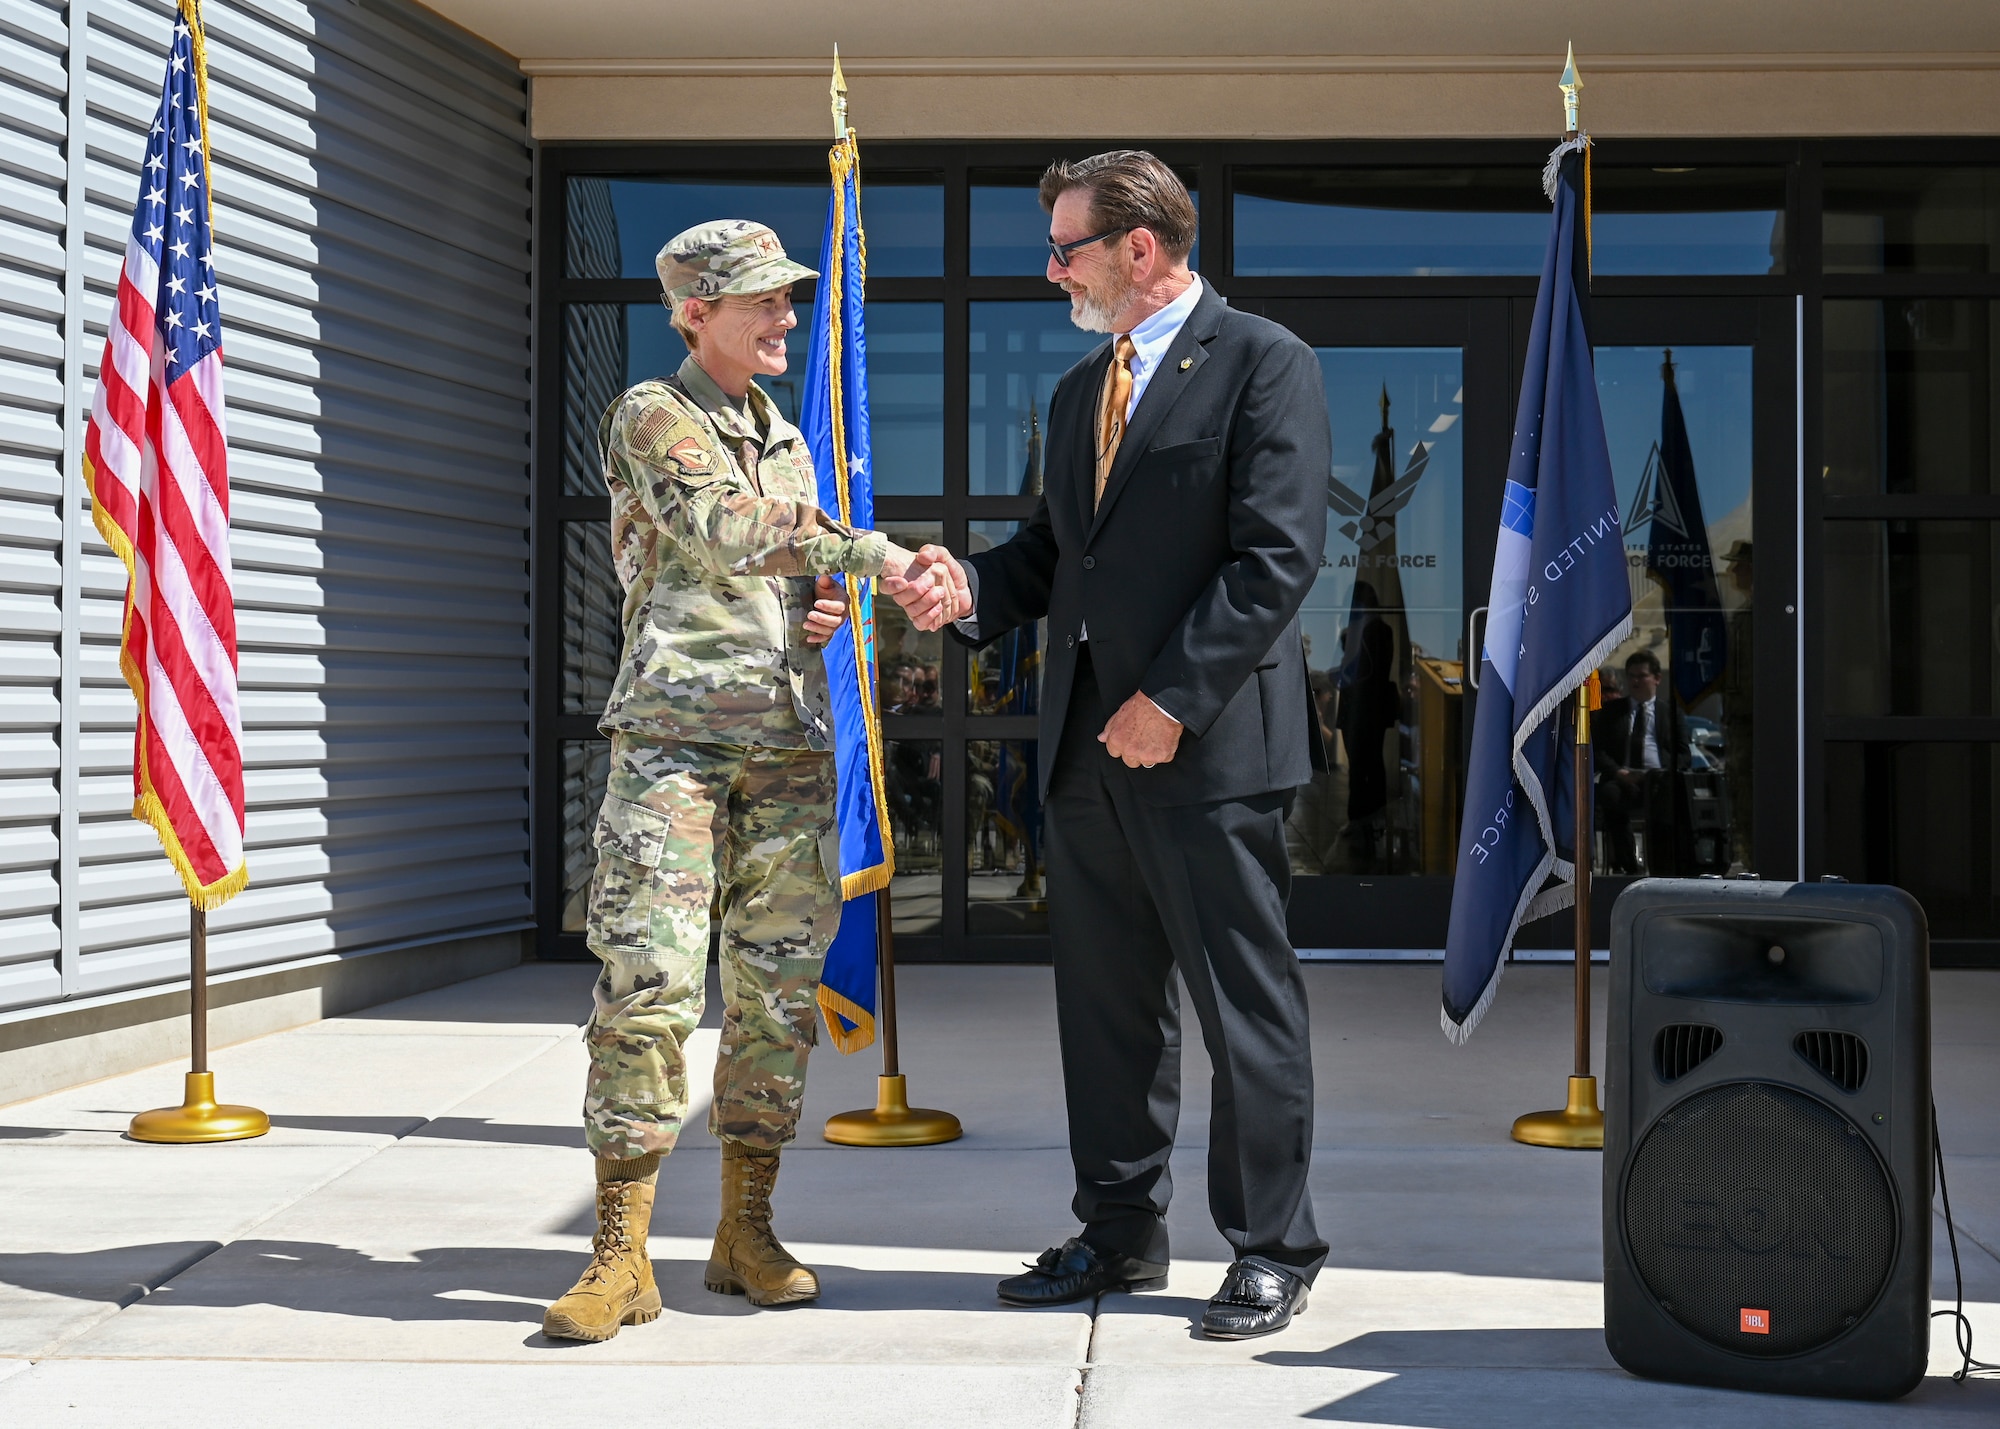 Air Force Research Laboratory Commander Maj. Gen. Heather Pringle presents the AFRL coin to Bradley Rieck, AFRL senior facility engineer, at the Space Warfighting Operations Research and Development laboratory ribbon cutting ceremony, held May 20 at Kirtland AFB, N.M. (U.S. Air Force photo/Tech. Sgt. Jenna Bigham)